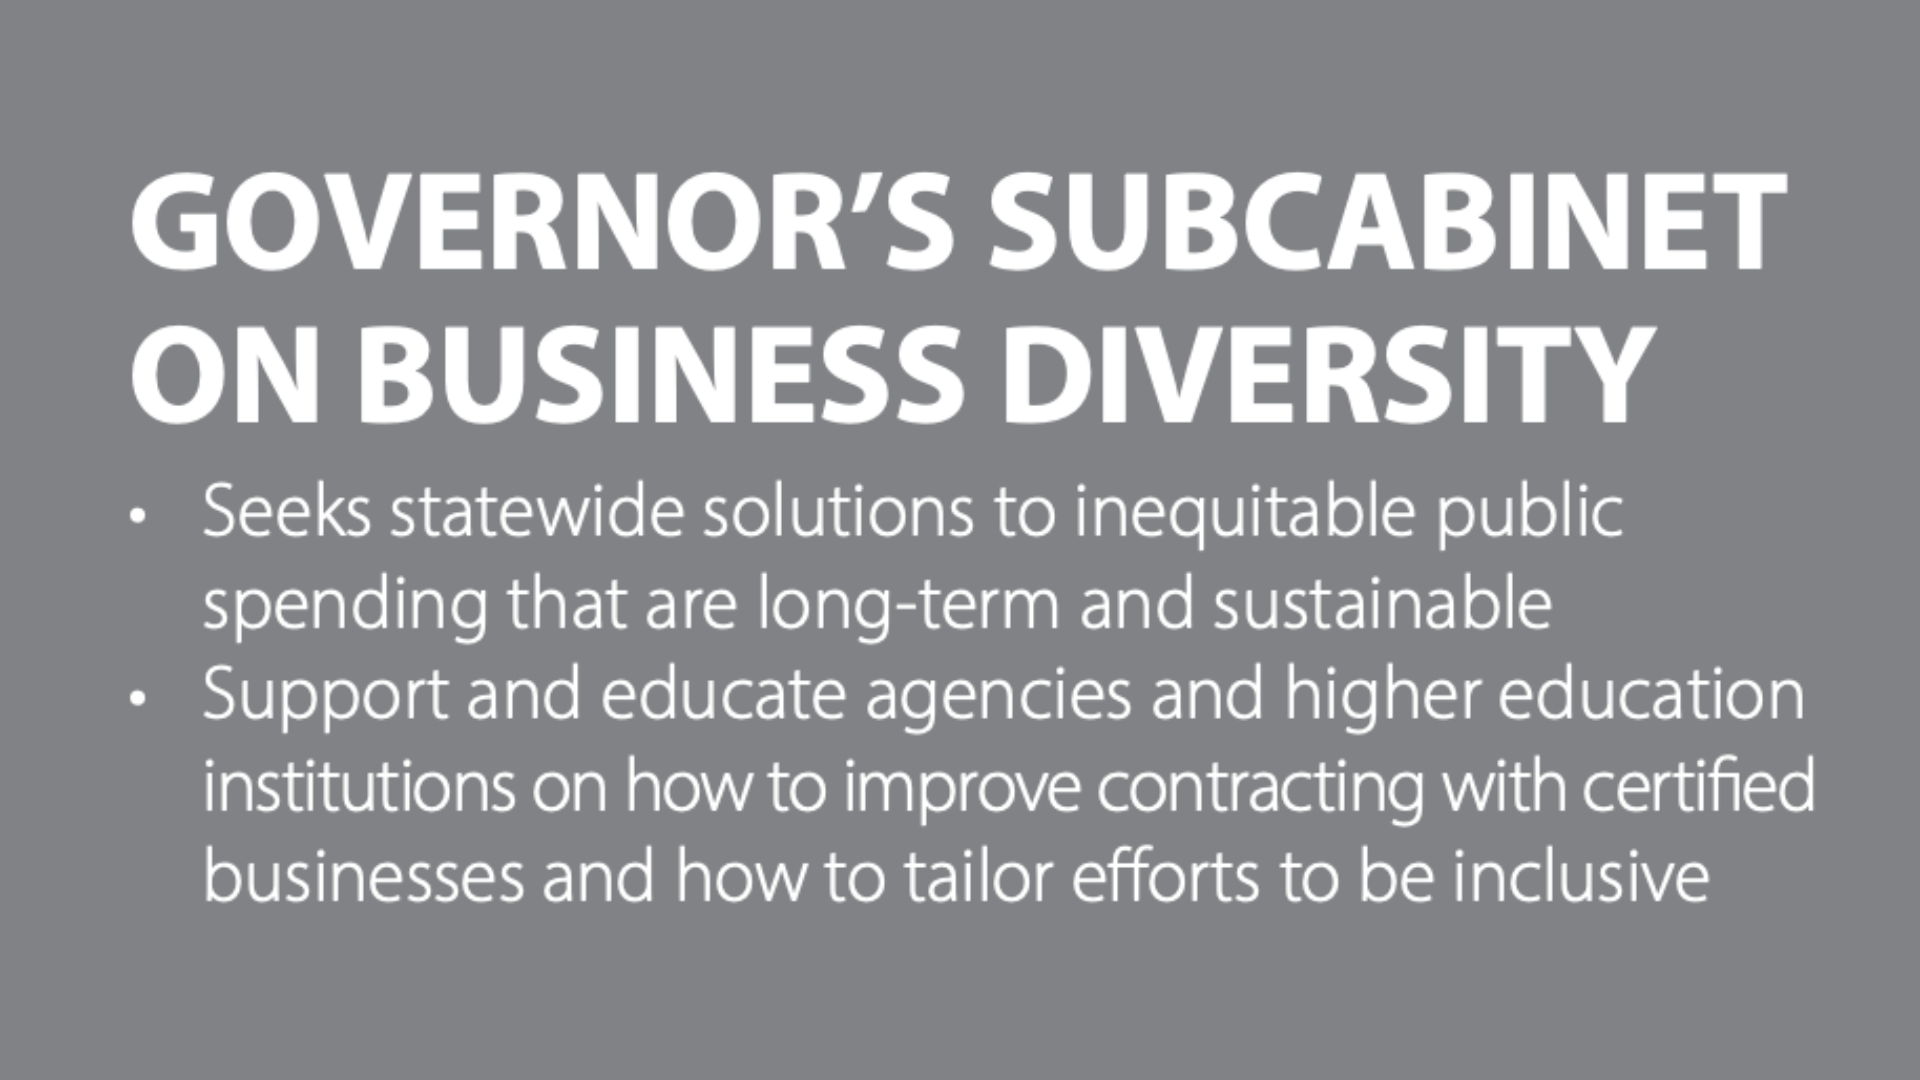 Graphic titled 'Governor’s Subcabinet on Business Diversity' highlighting their mission to seek statewide solutions to inequitable public spending that are long-term and sustainable. It also mentions supporting and educating agencies and higher education institutions on improving contracting with certified businesses and tailoring efforts to be inclusive.